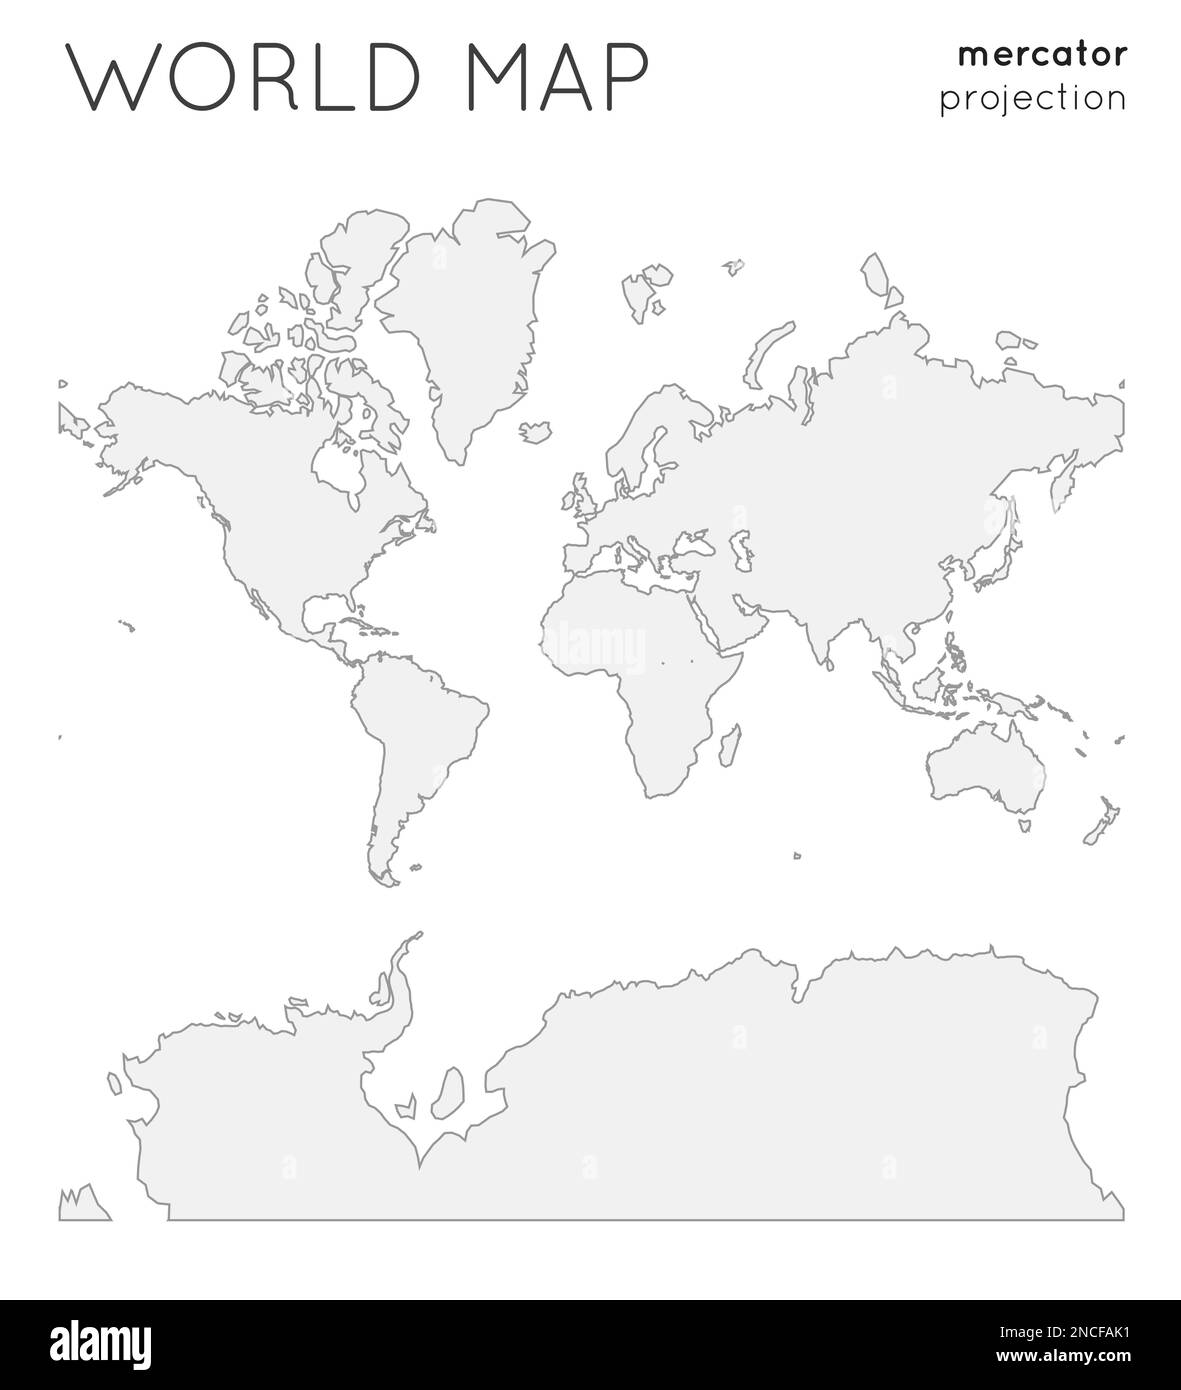 World map. Globe in mercator projection, plain style. Outline vector ...